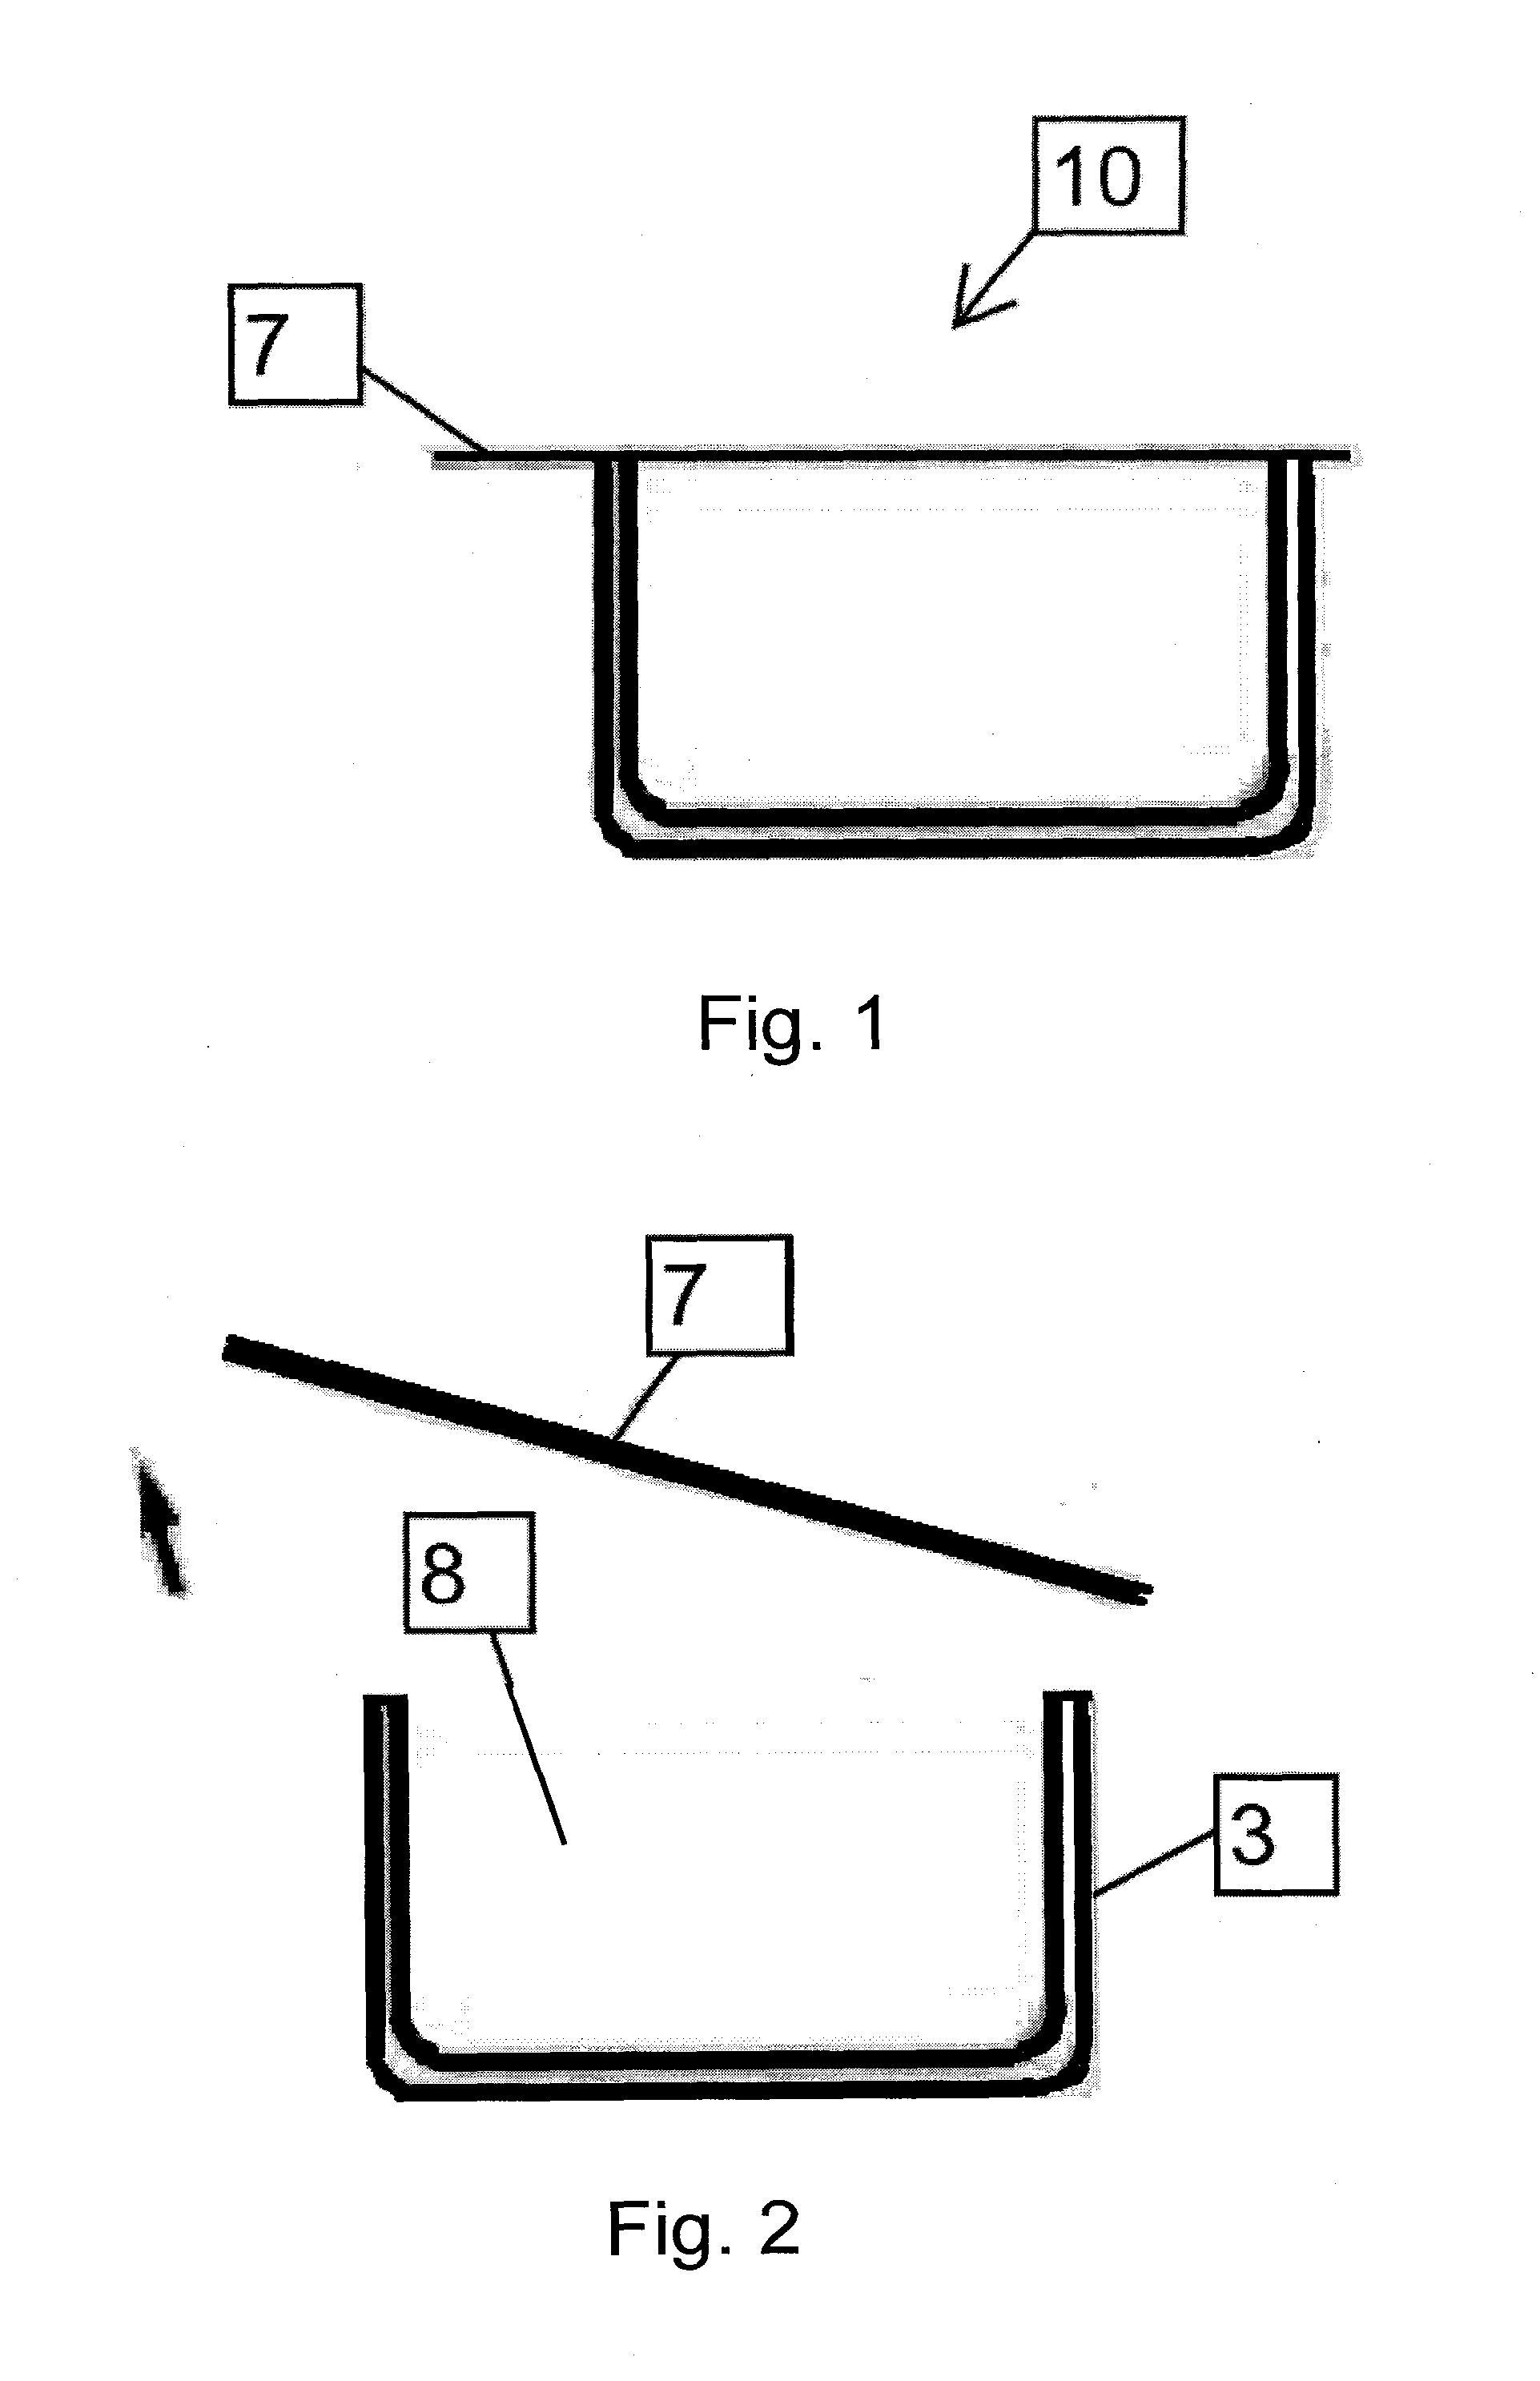 Apparatus and method for preparing a decorated cake